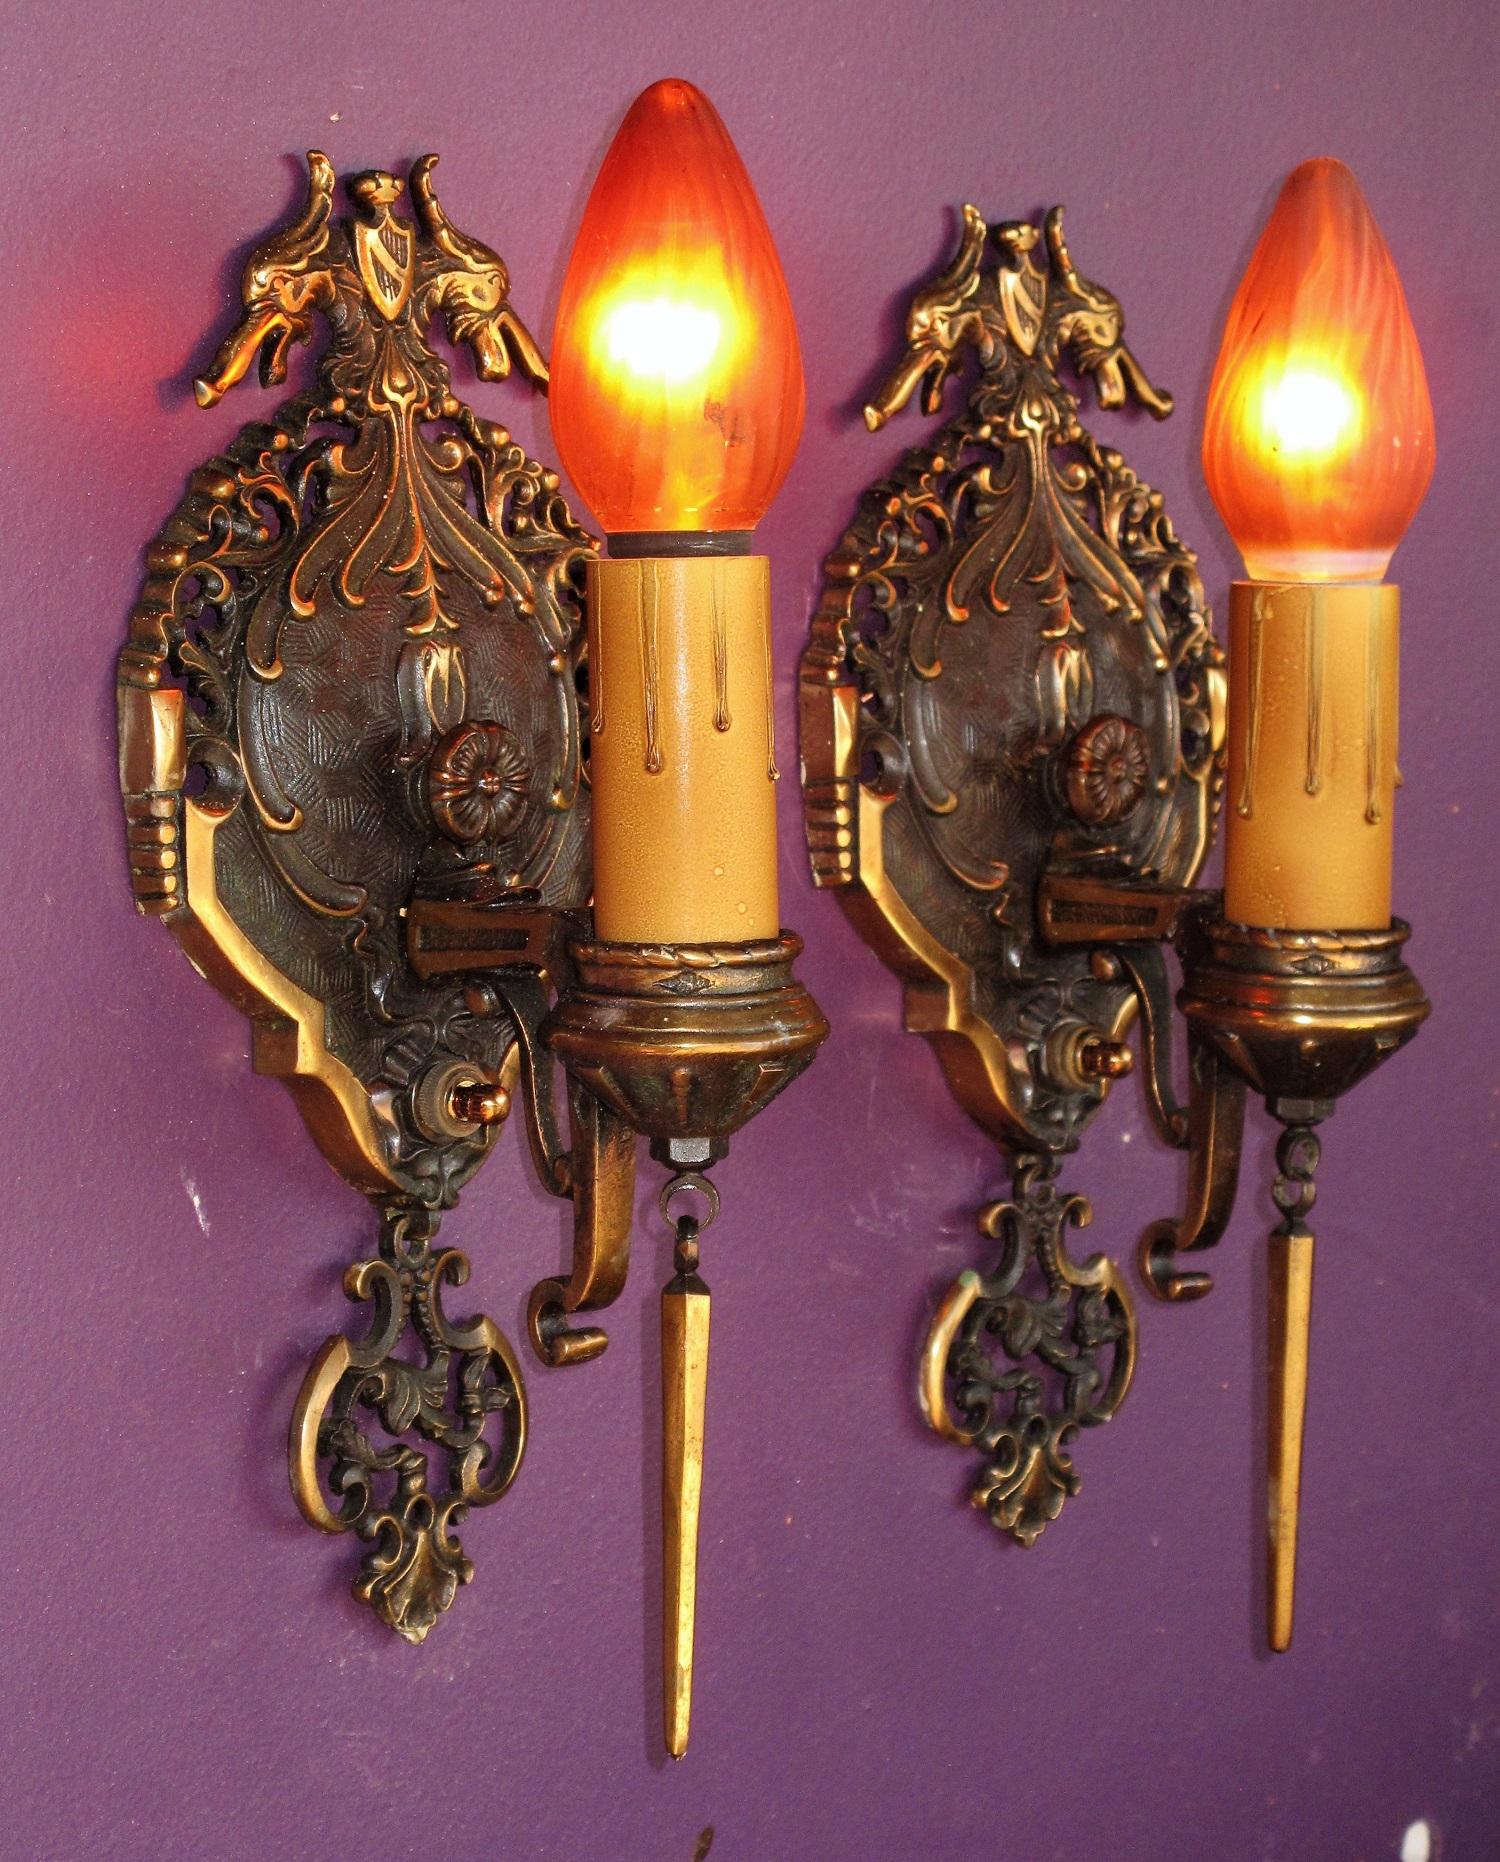 Wonderfully executed solid bronze sconces by Mid-West Chandelier Co., shown in their 1928 catalog. These outstanding sconces retain their original finish and patina. With detailed dragon heads protecting their environment down to the icicle finials